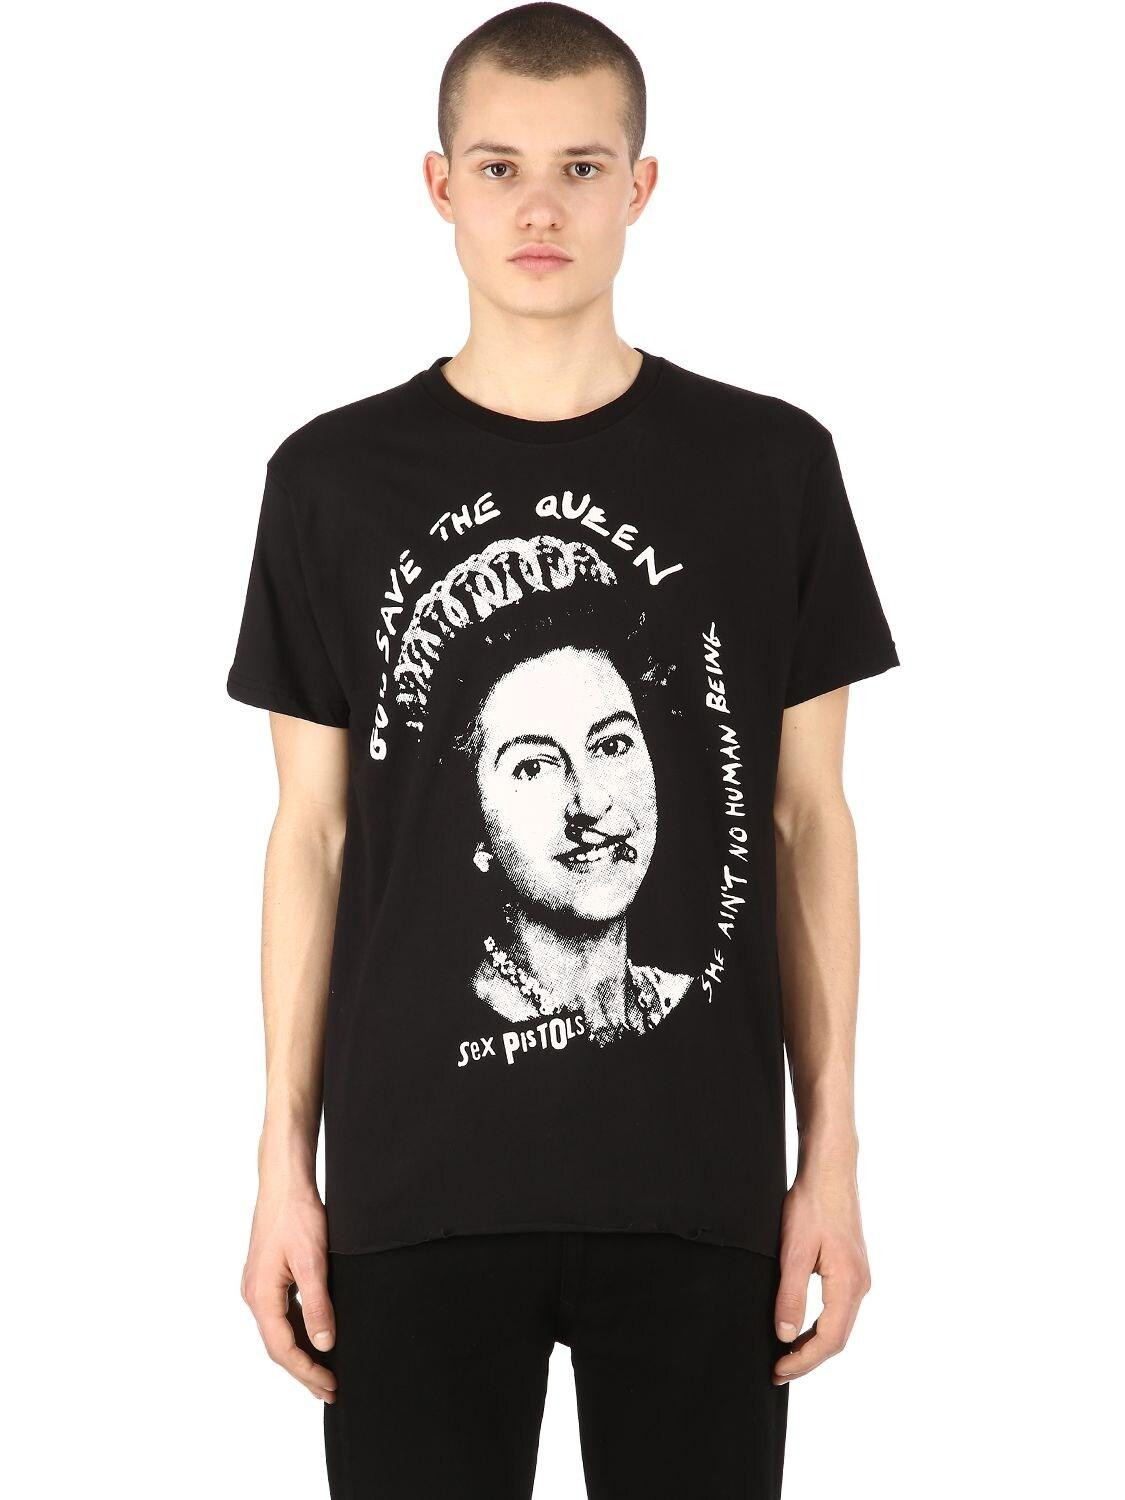 BOY London God Save The Queen Jersey T-shirt in Black for Men - Lyst